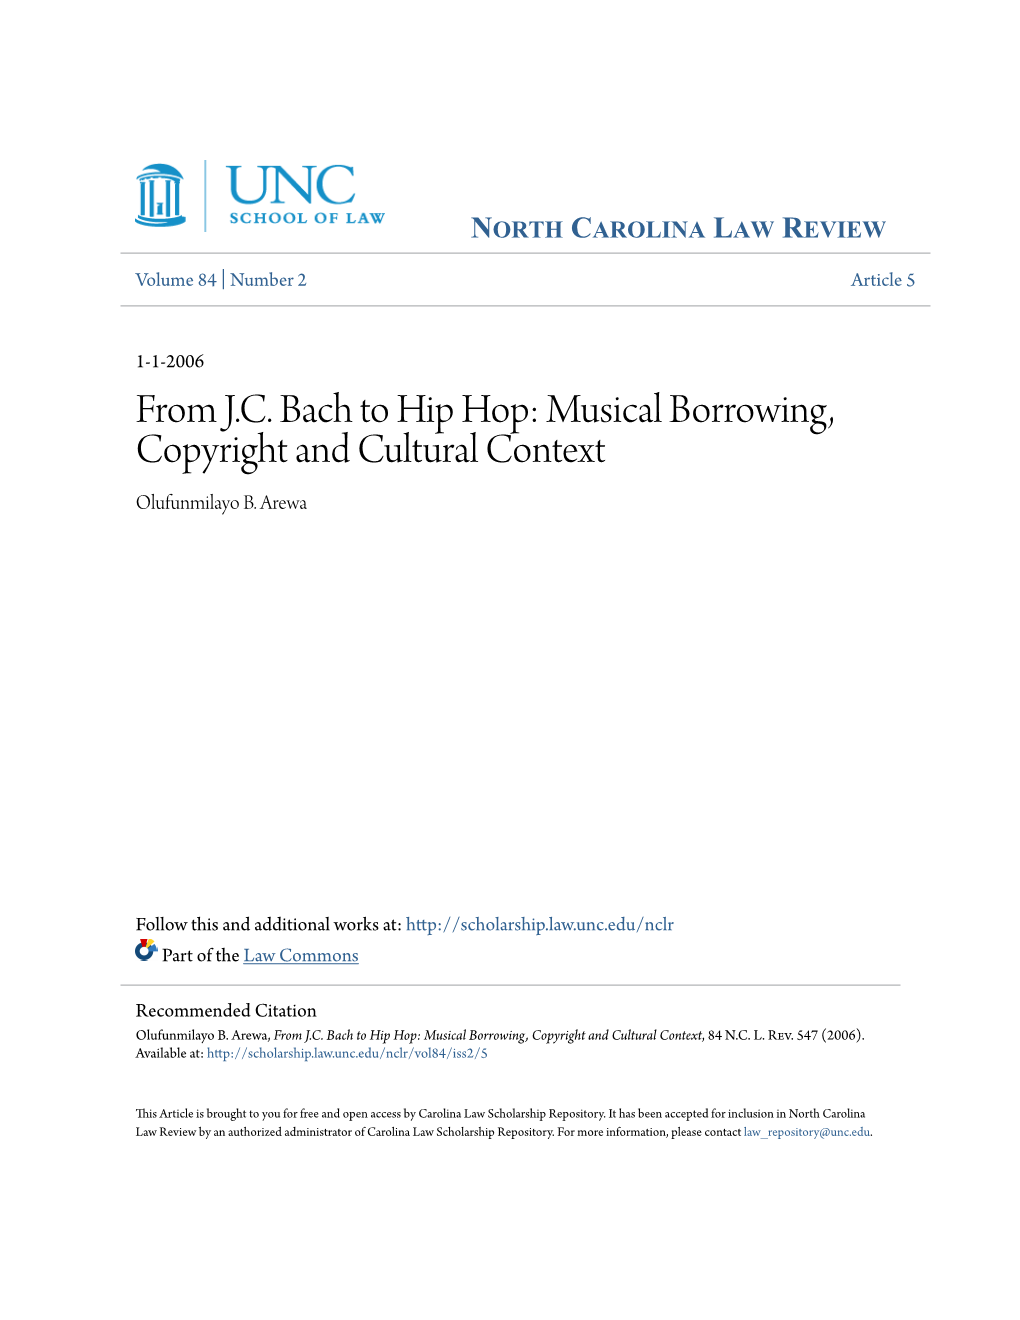 From J.C. Bach to Hip Hop: Musical Borrowing, Copyright and Cultural Context Olufunmilayo B